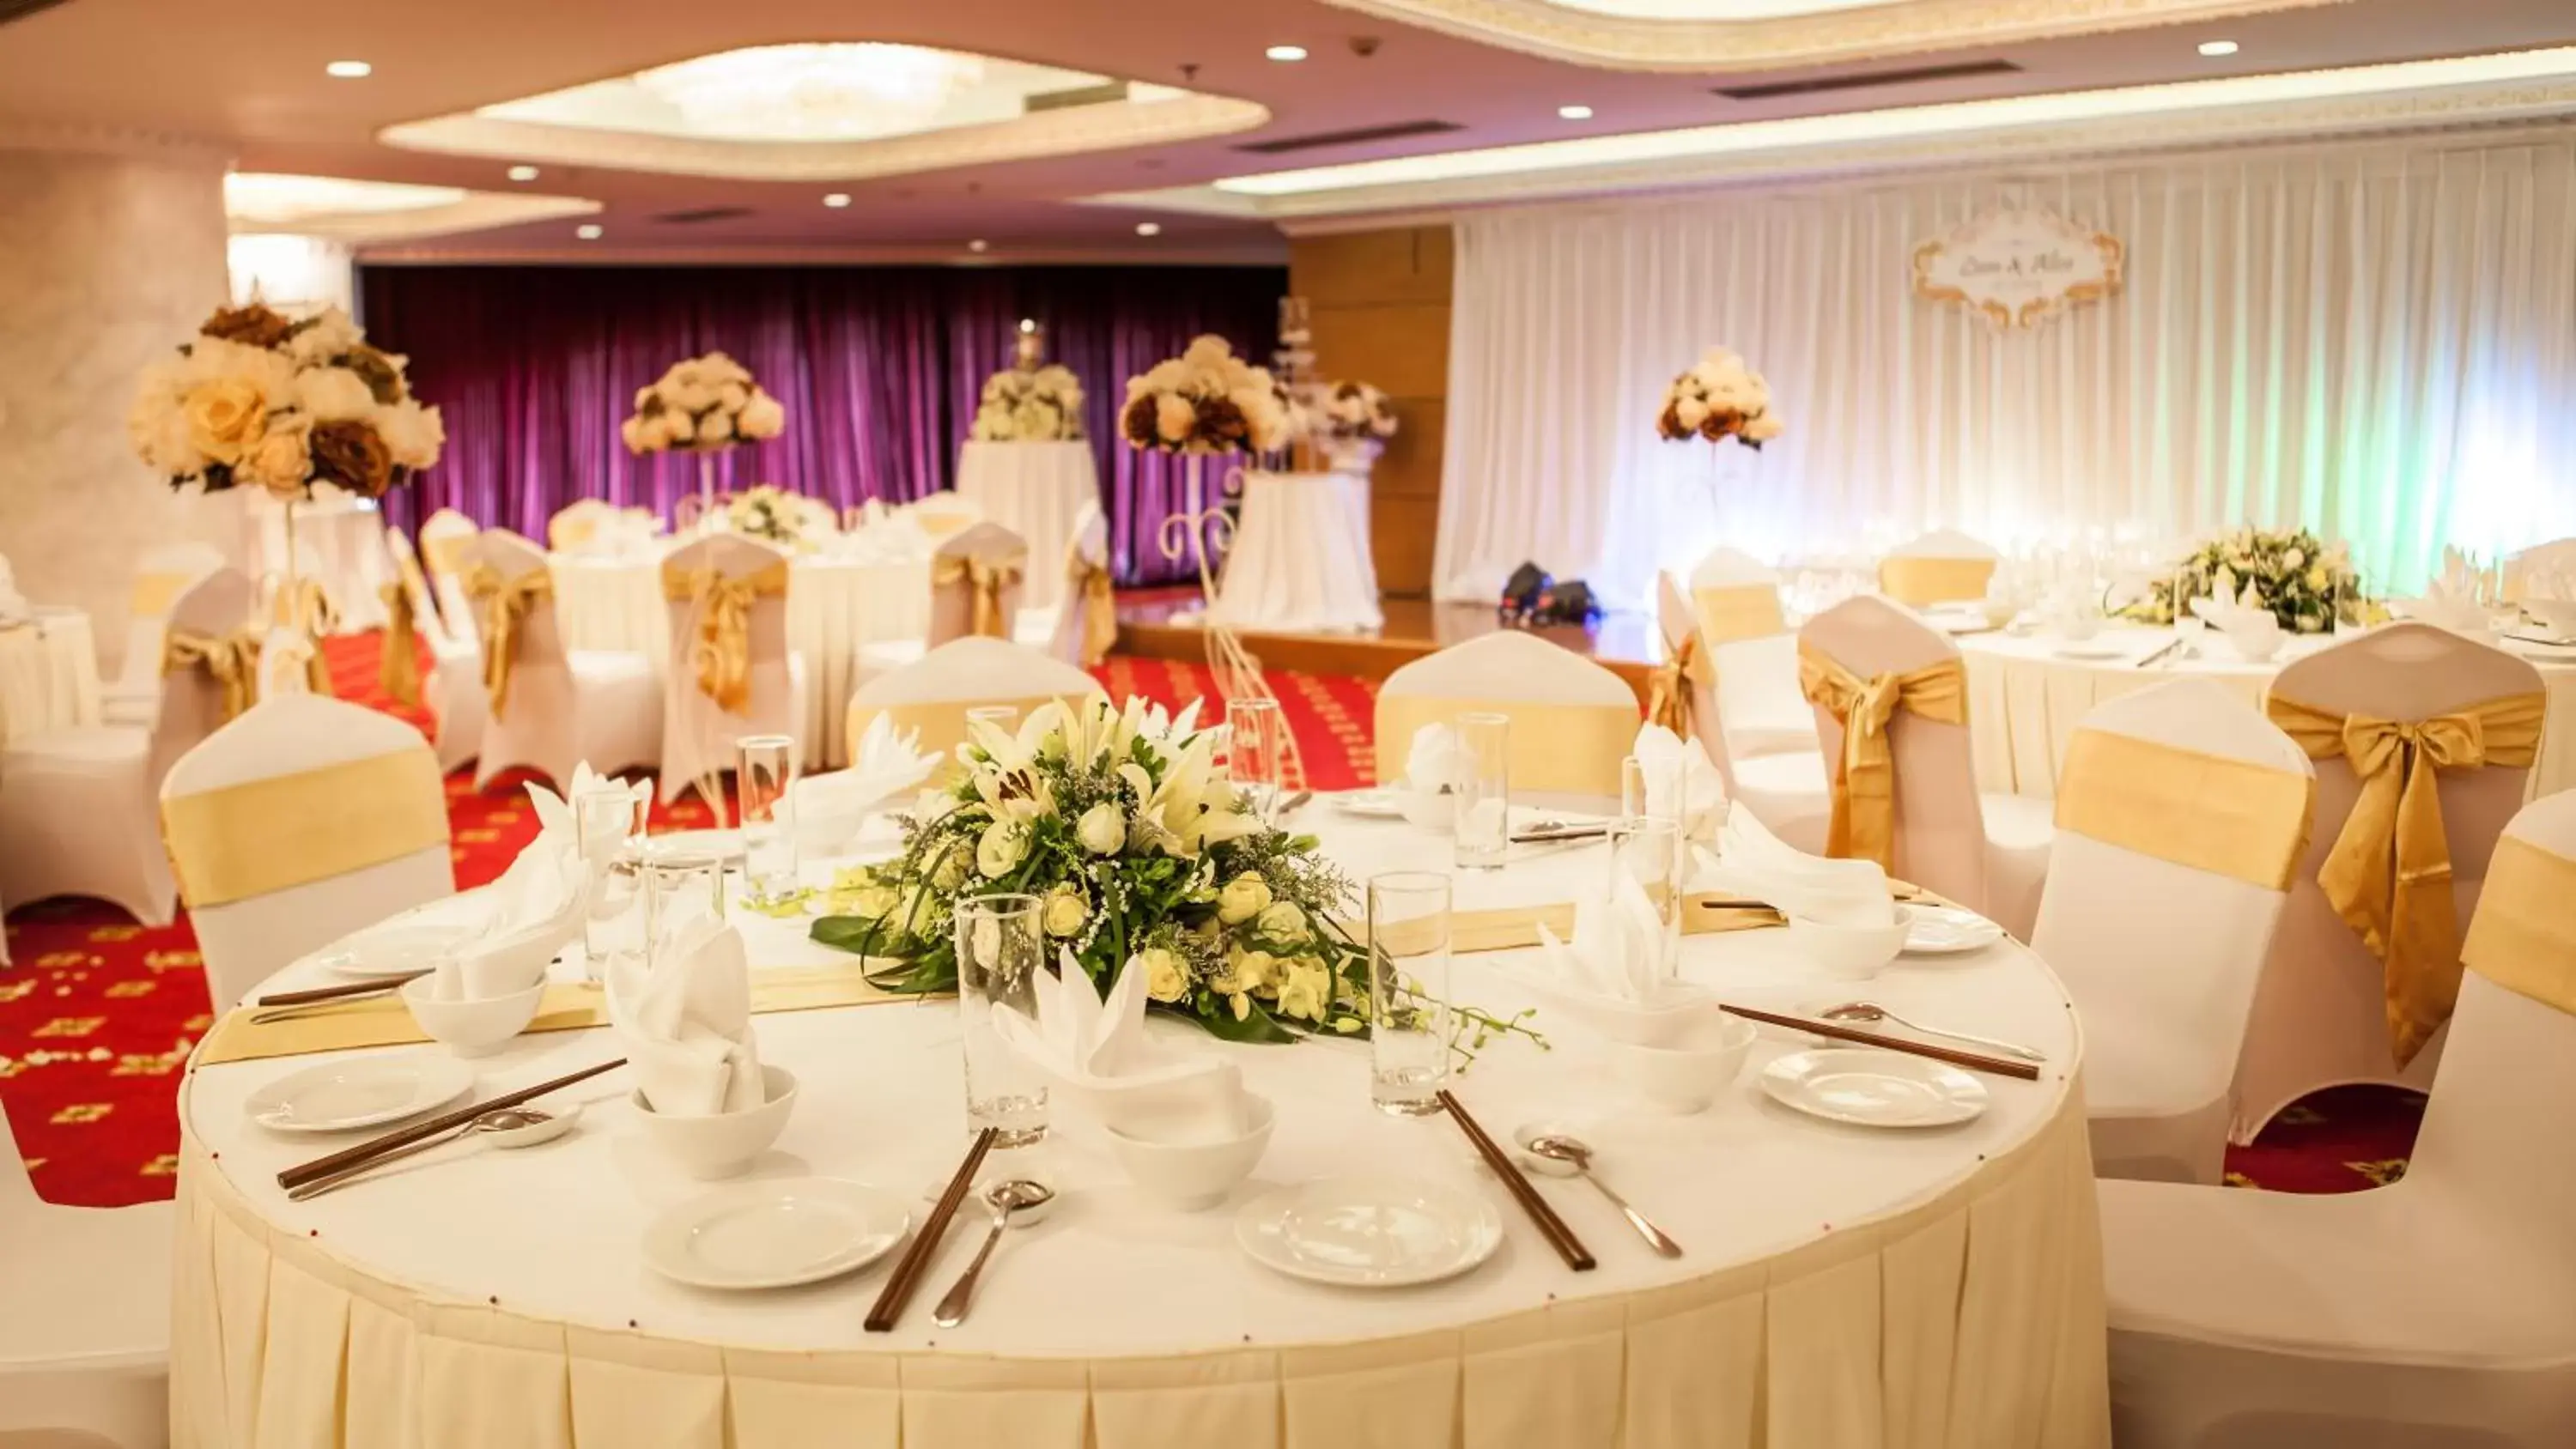 Banquet/Function facilities, Banquet Facilities in Super Hotel Candle